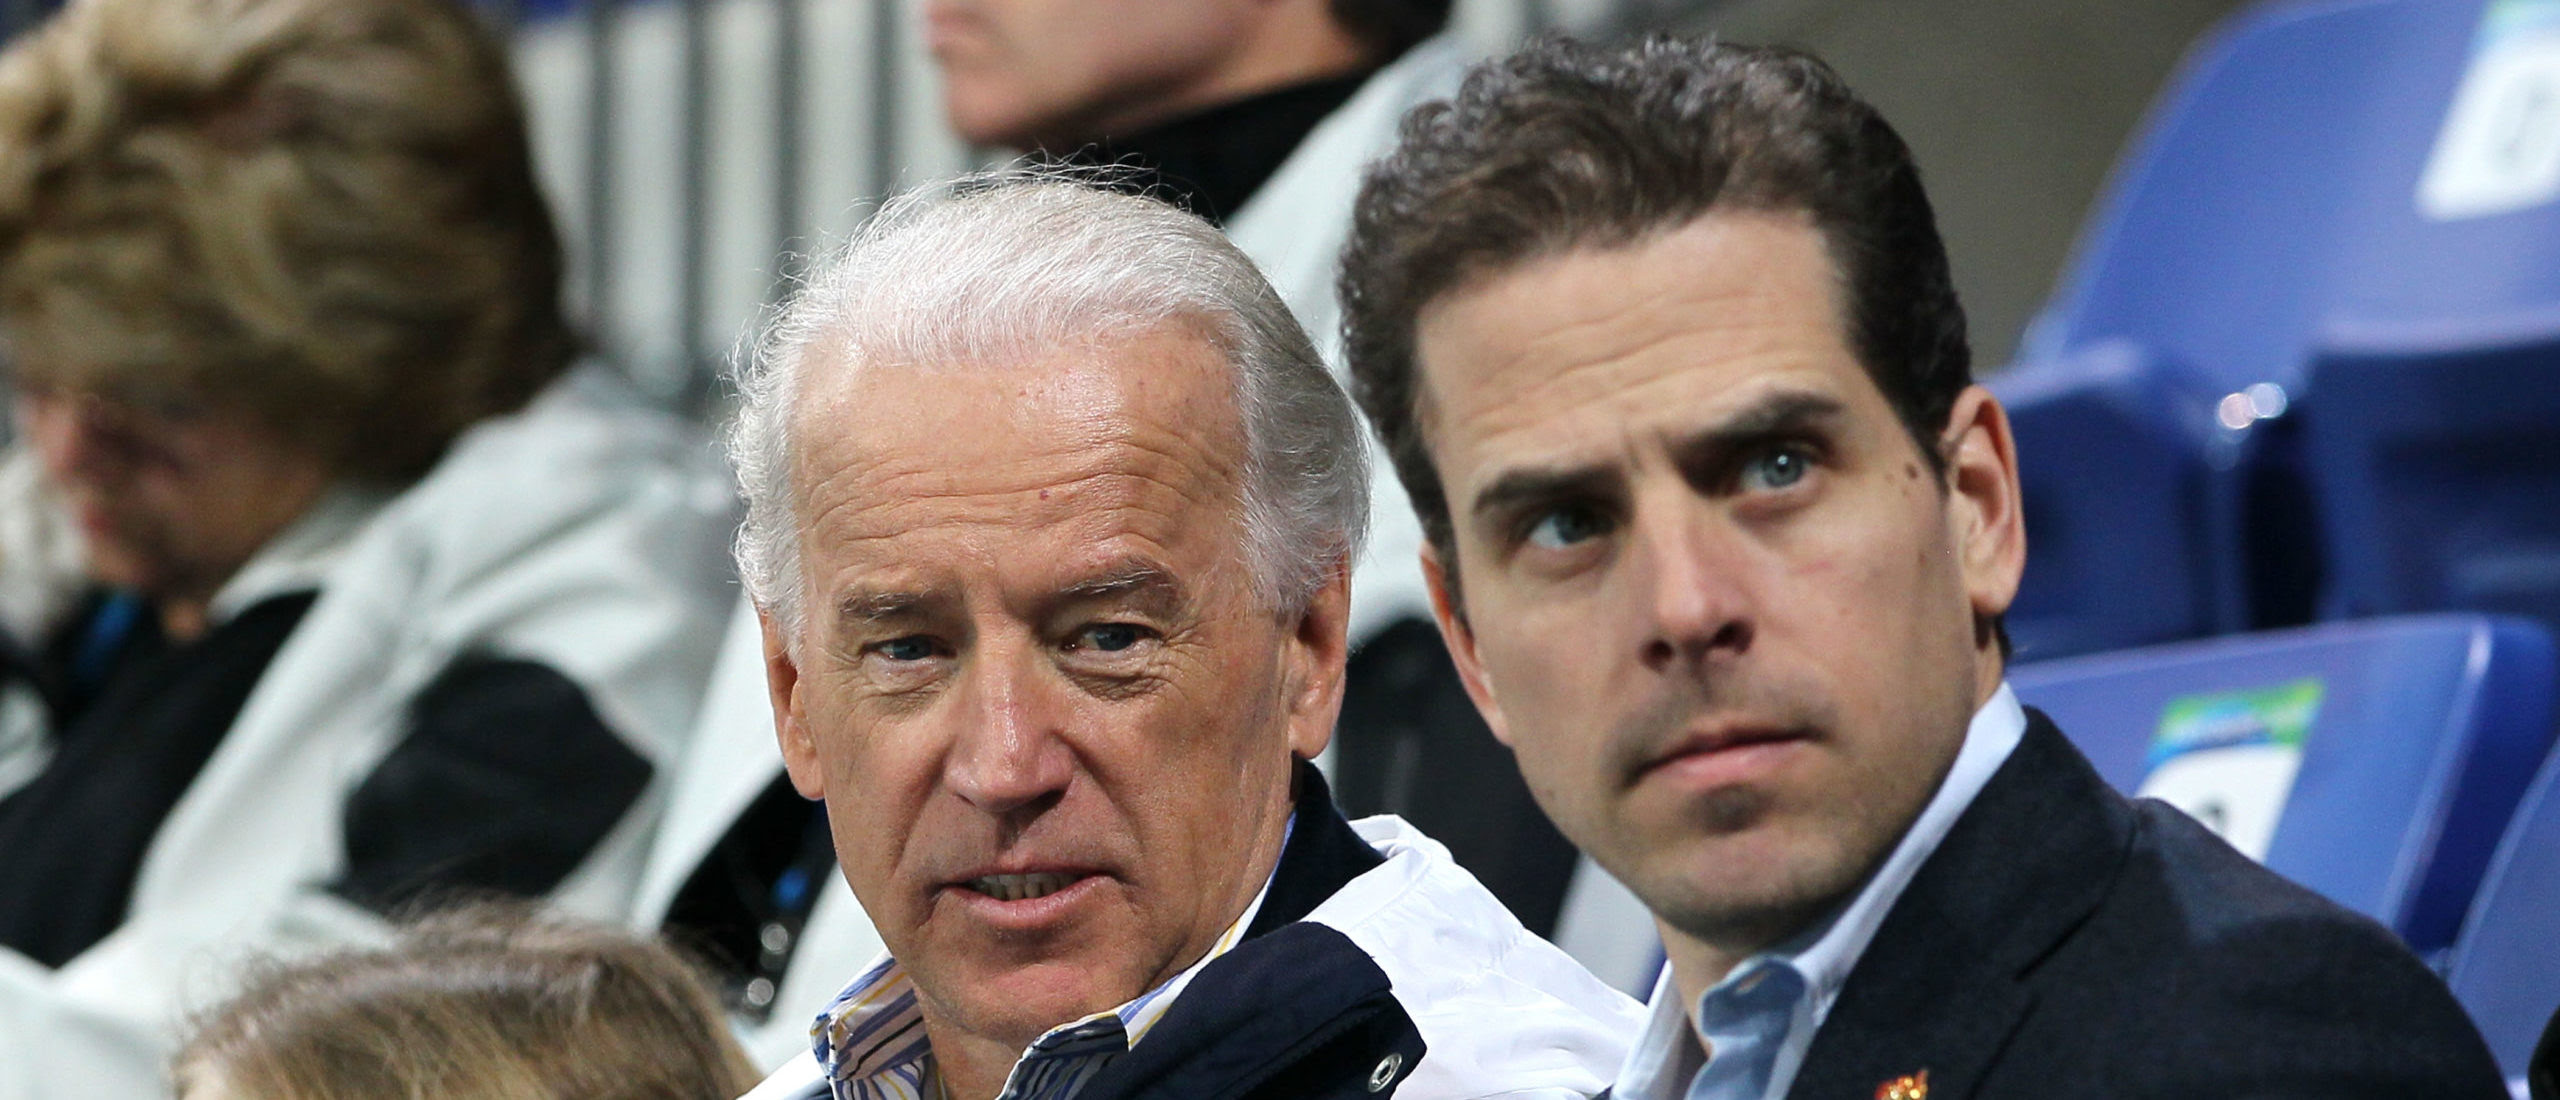 New House Committee Aims Specifically At Foreign Influence Of Joe Biden